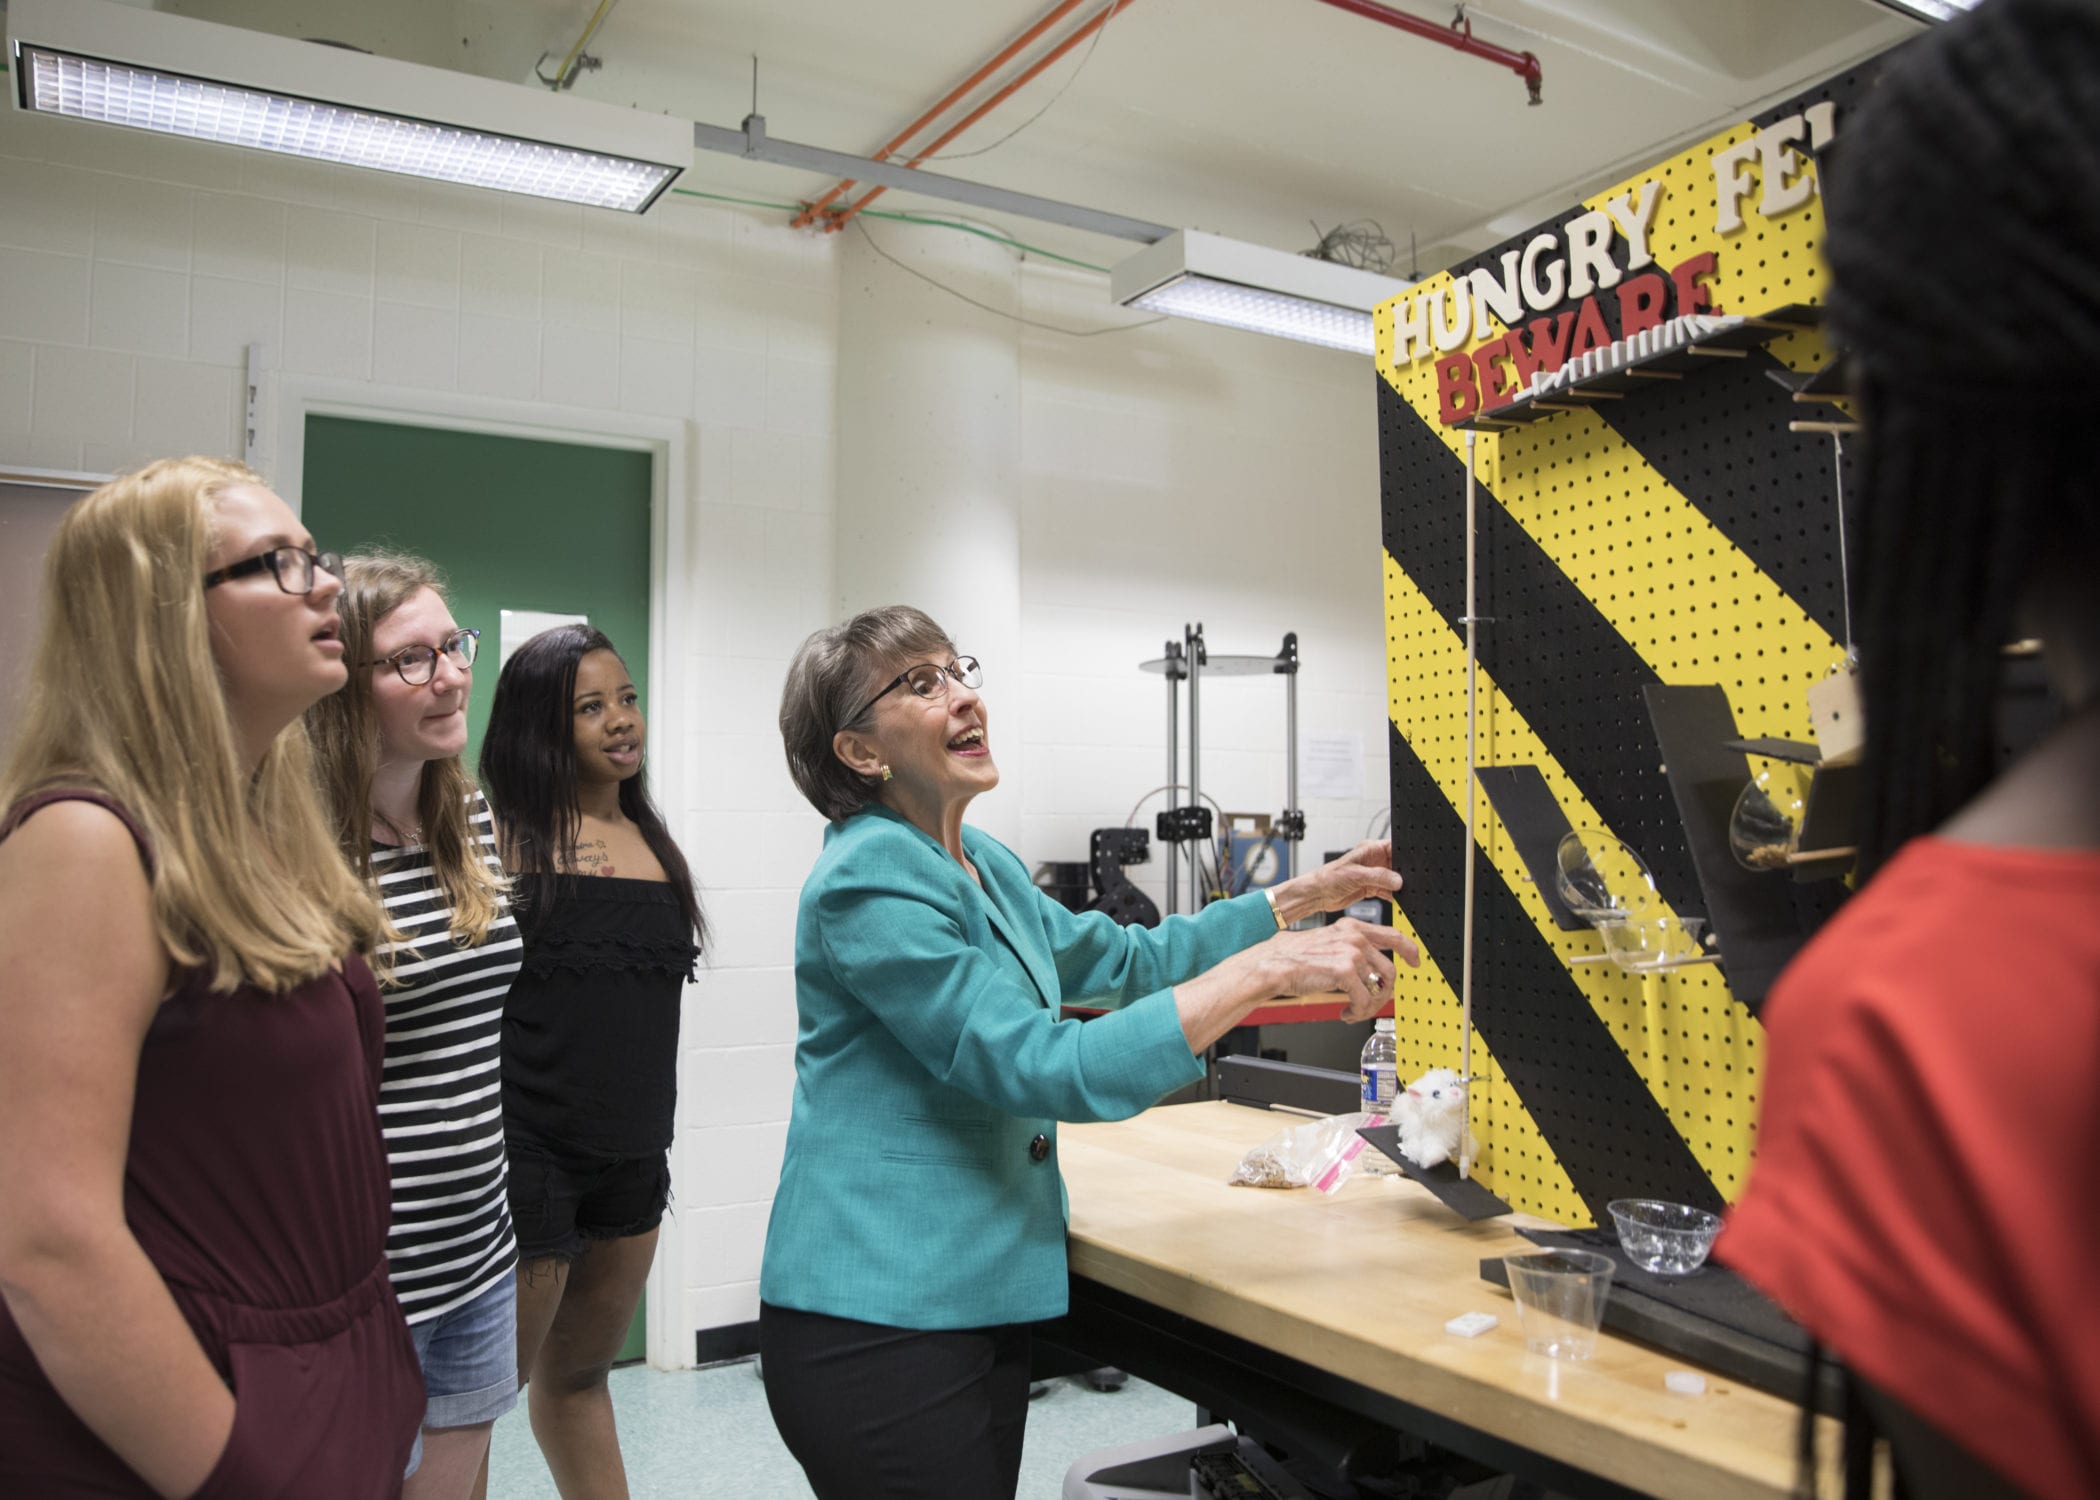 SUNY Broome instructor featured in story on women in STEM